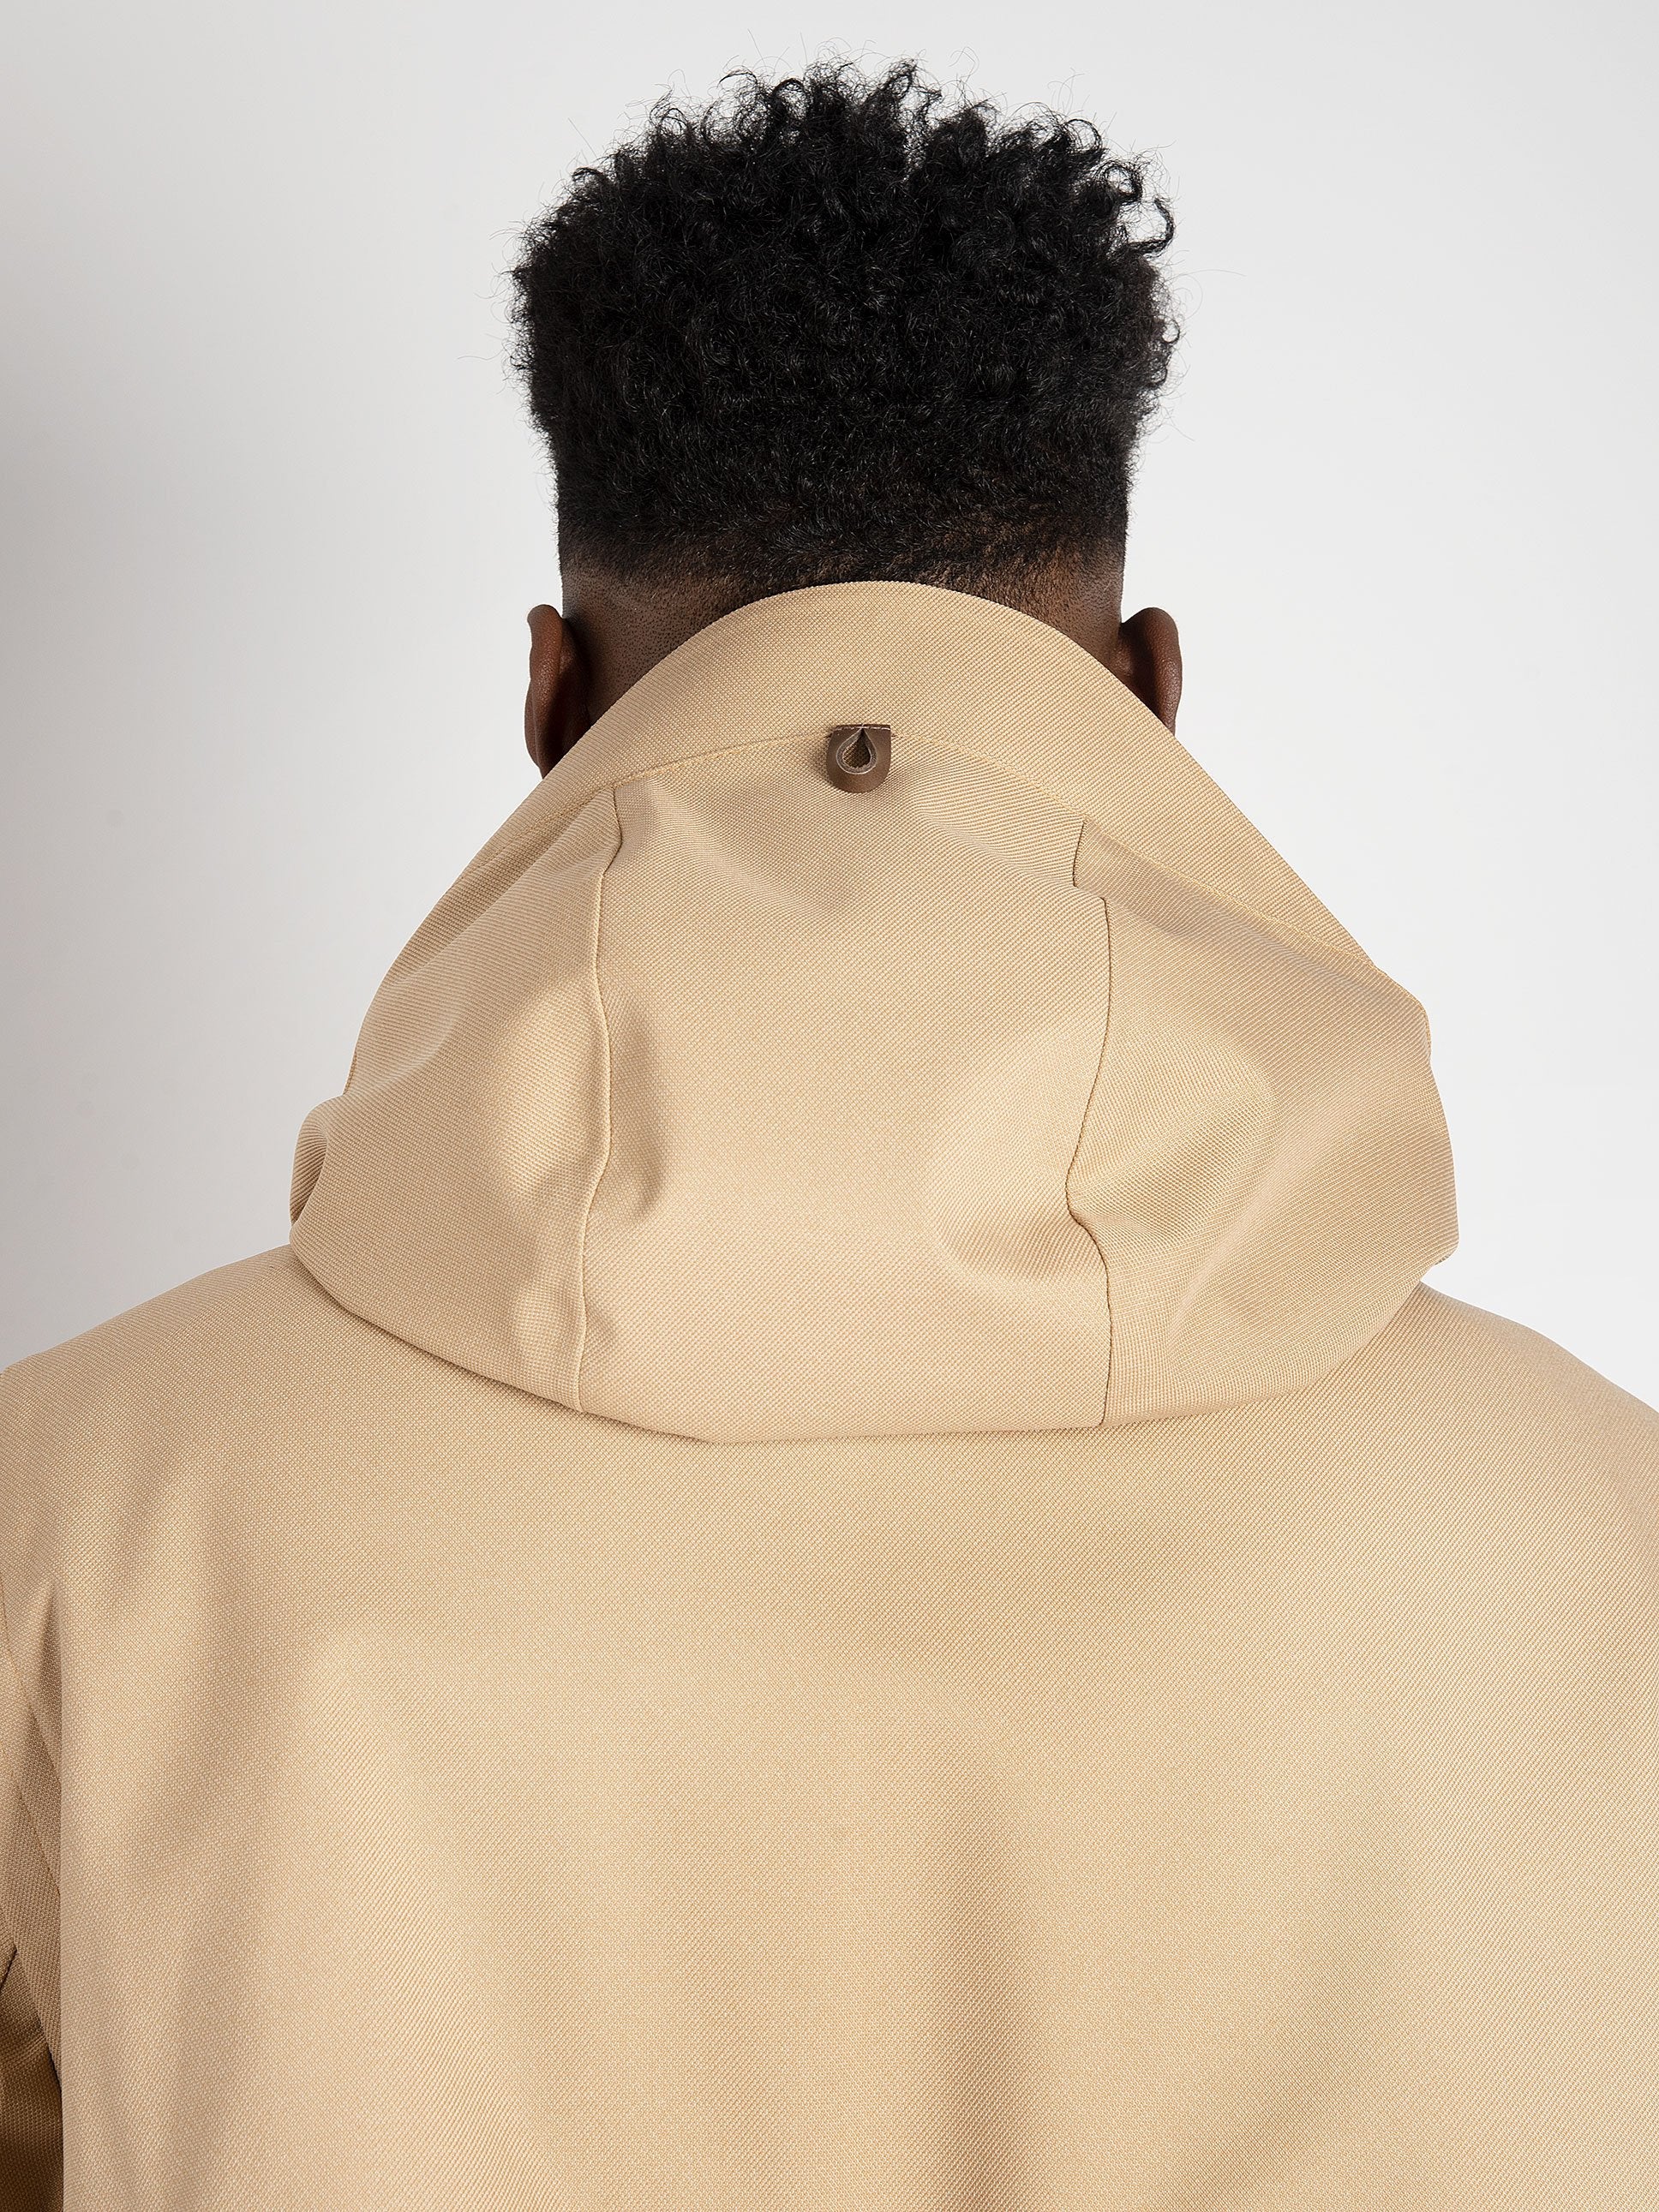 Trench 'Mayfair Homme' - Cammello